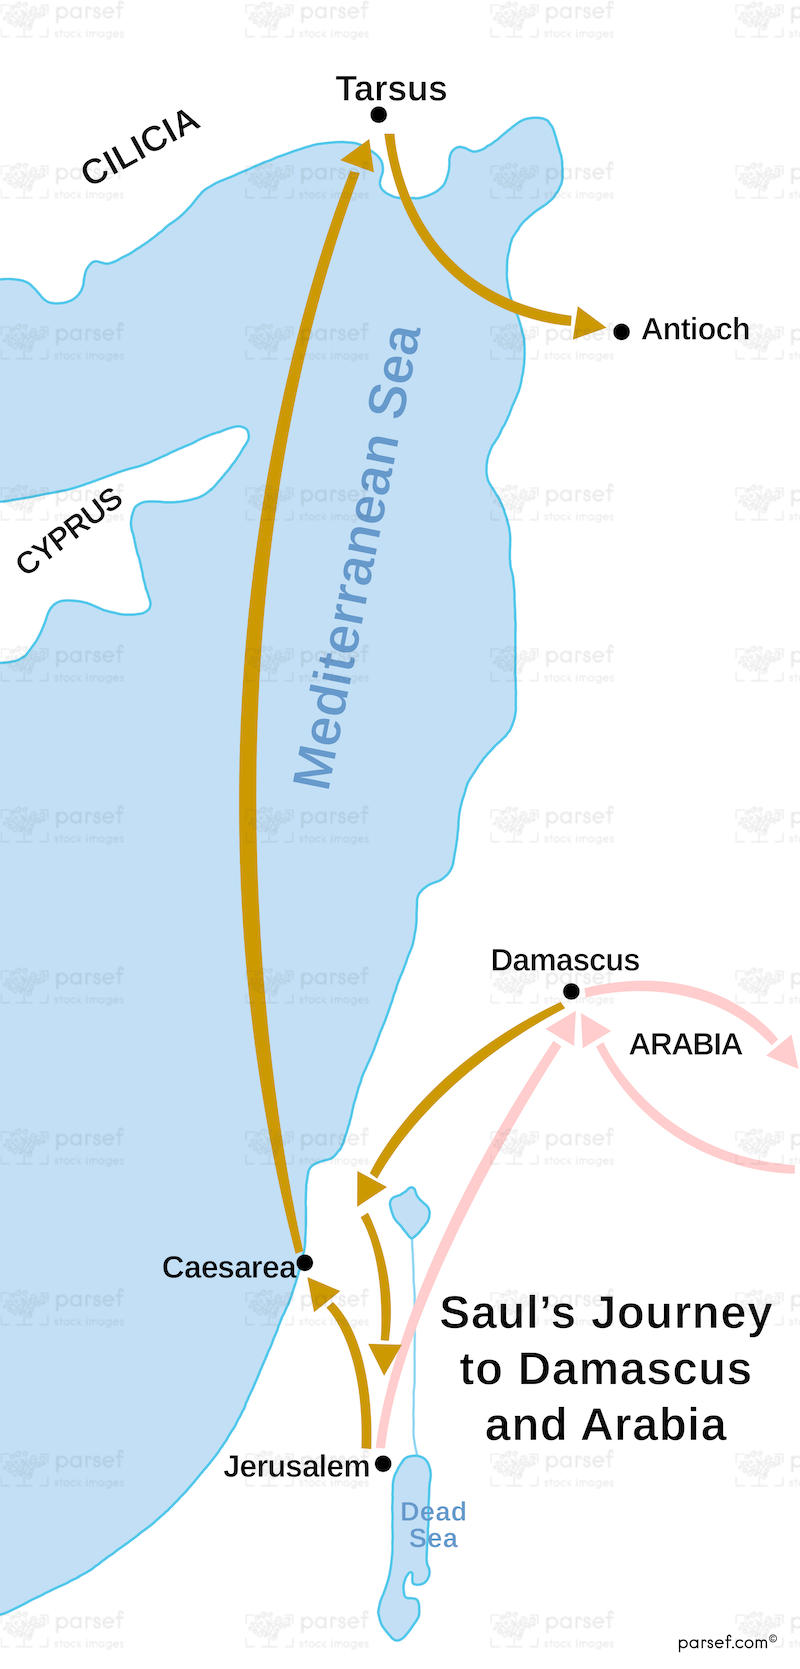 Saul’s Journey to Damascus and Arabia Map image